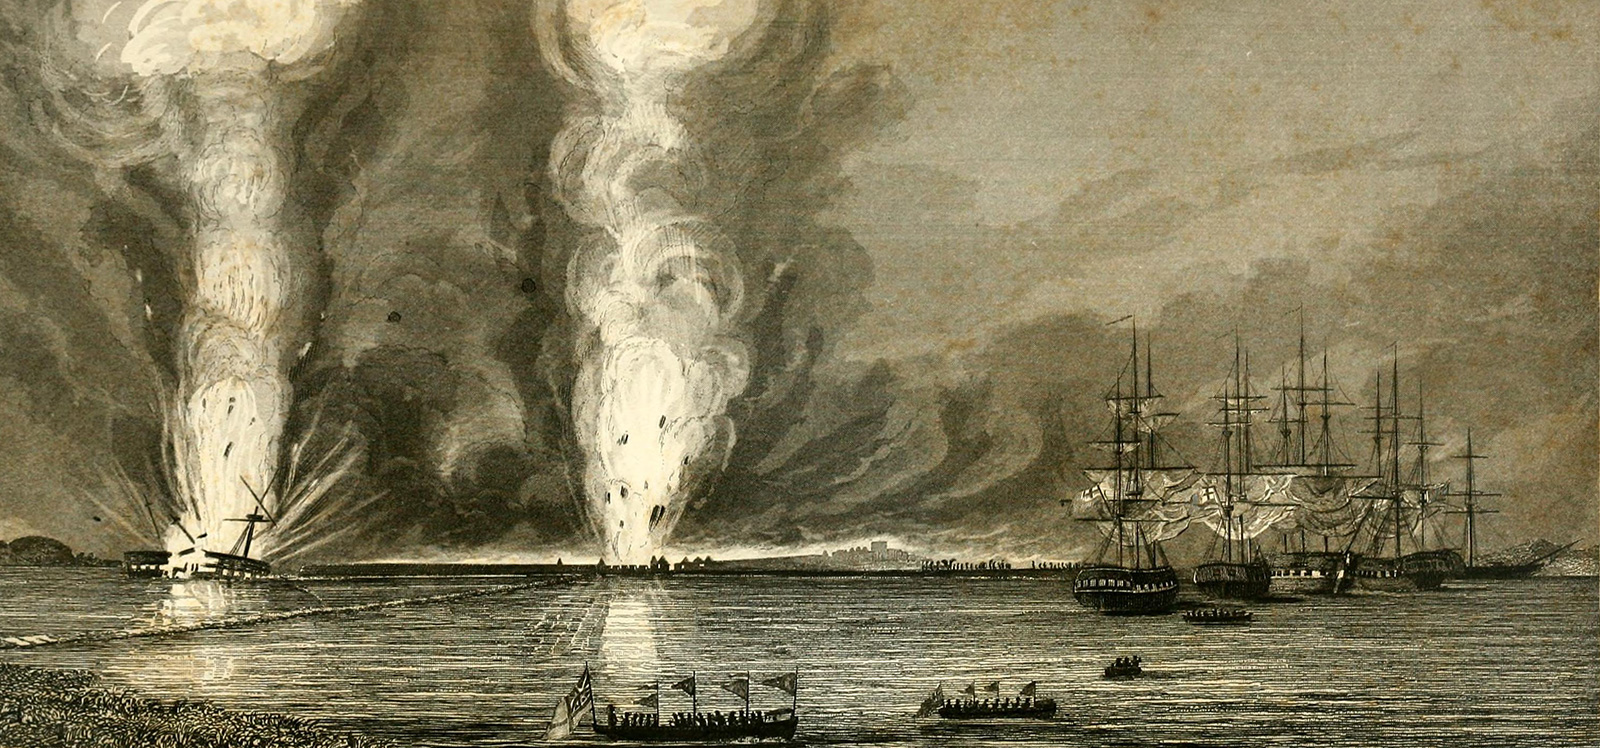 British ships destroy Chinese junks on the Pearl River in 1841.